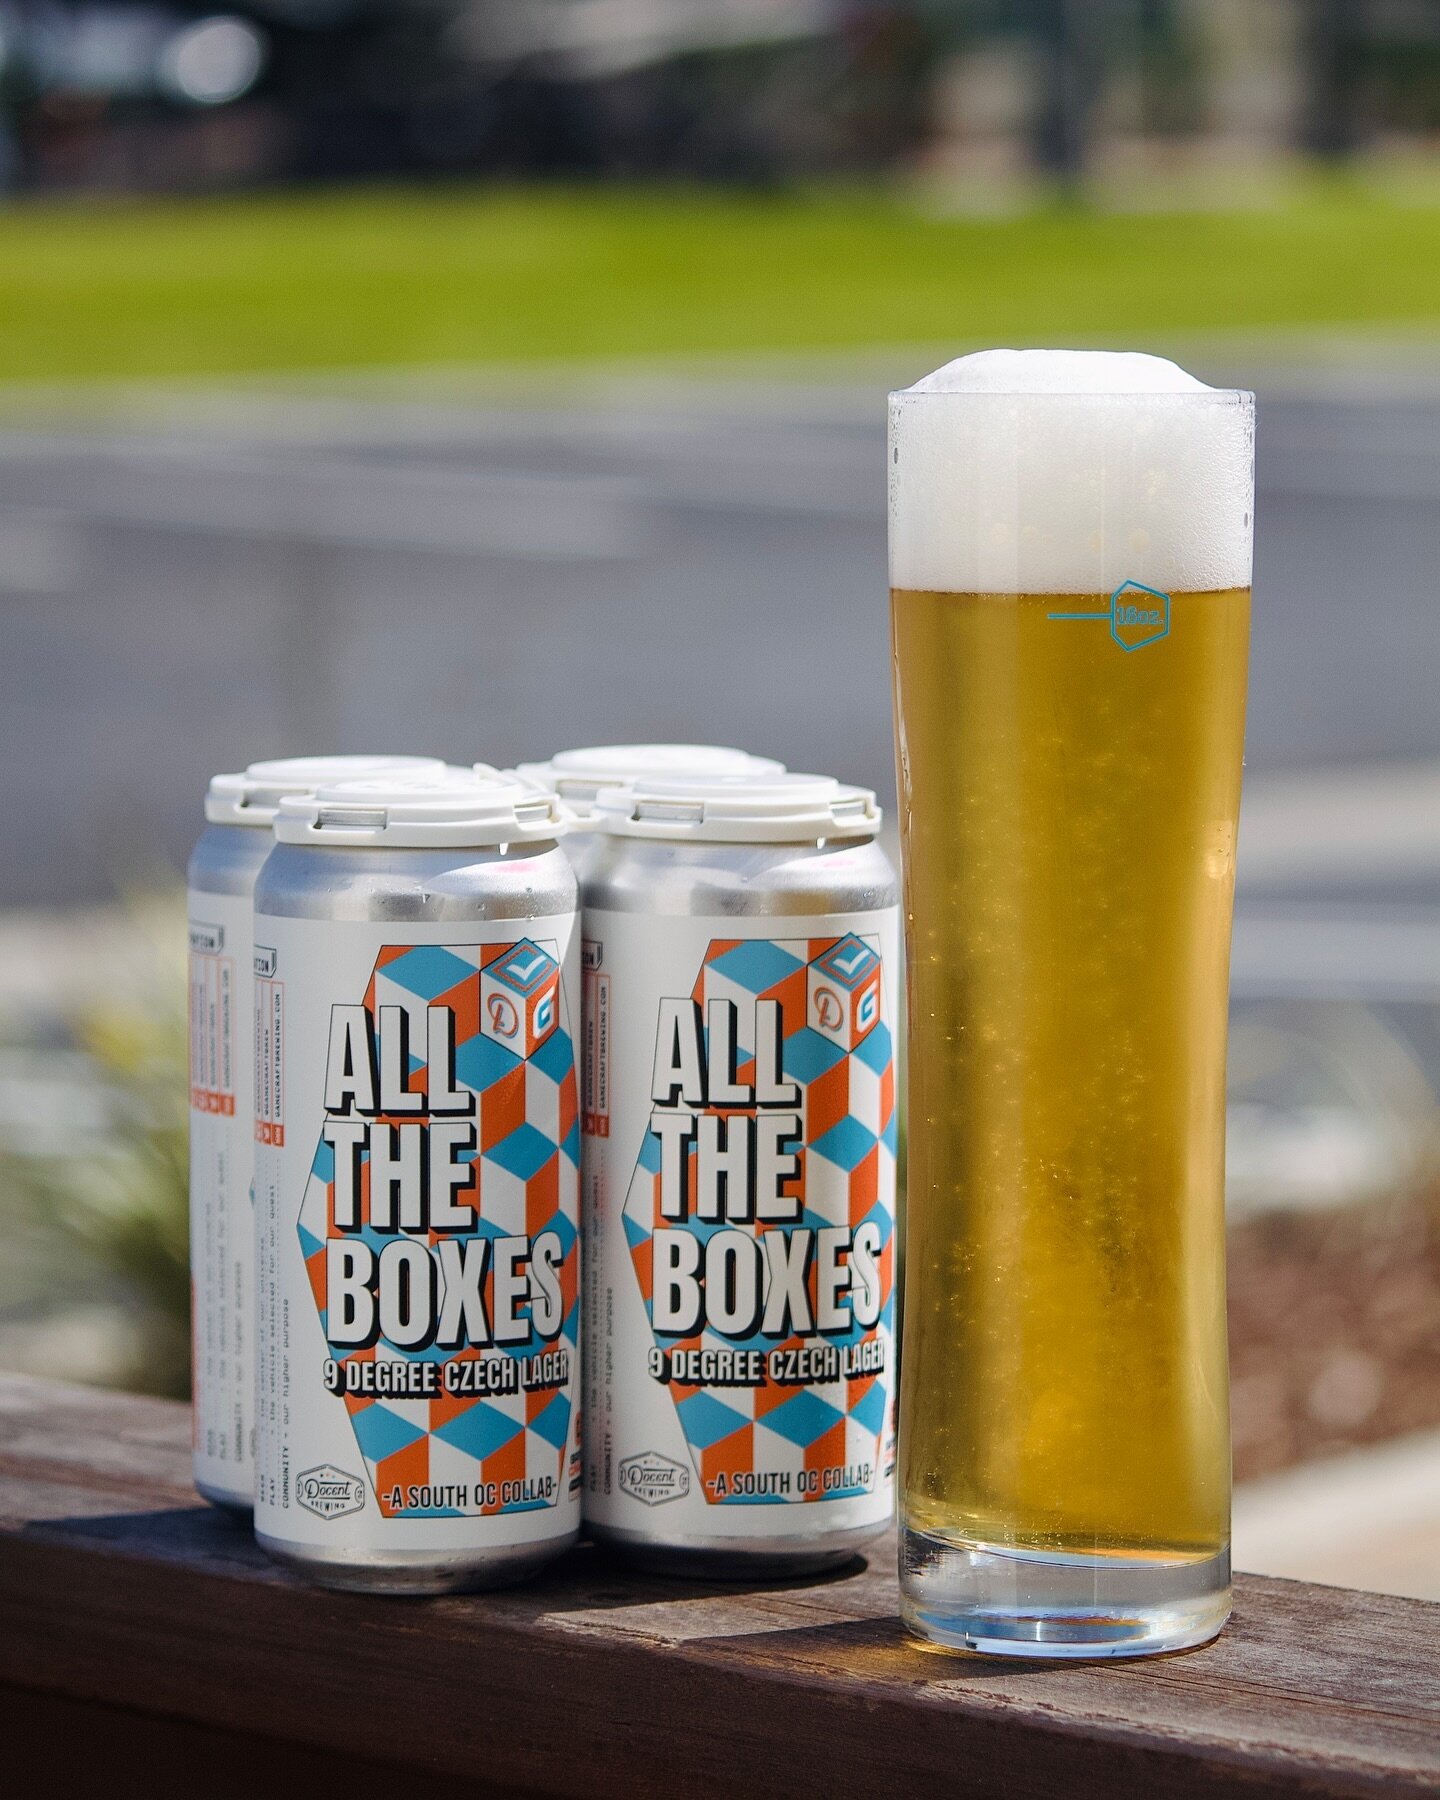 Our new favorite crispi boi All The Boxes is on draft and in cans today! Swing by and crush some delicious 9&deg; Czech Lager and take home some 4 packs for the weekend yard work. 

All The Boxes
9&deg; Czech Lager
3.5% ABV 
Collab with @docentbrewin